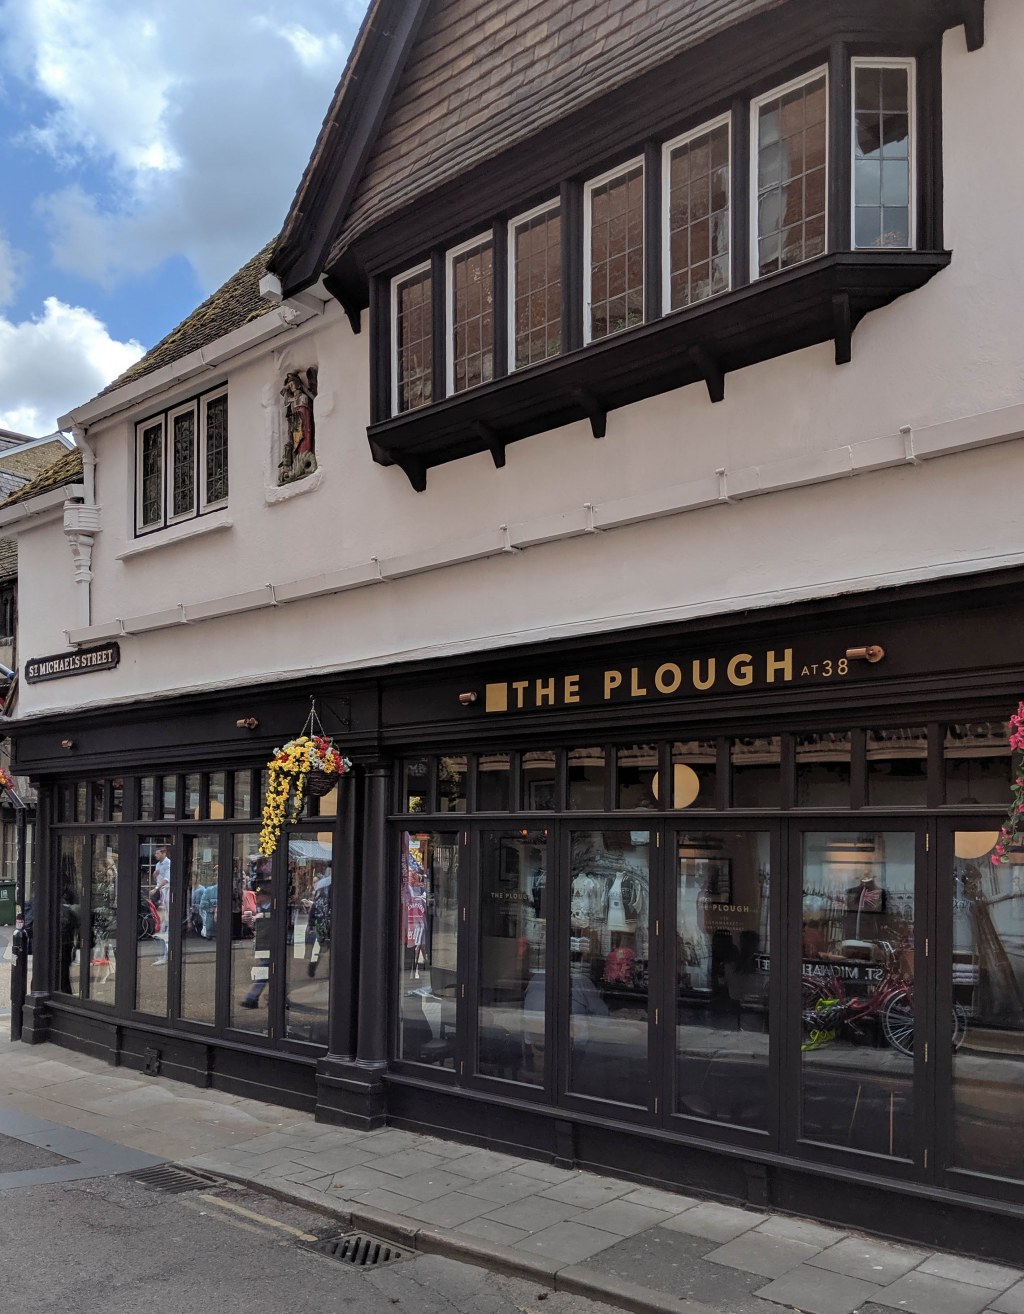 The Plough, Central Oxford / Exterior view from side street